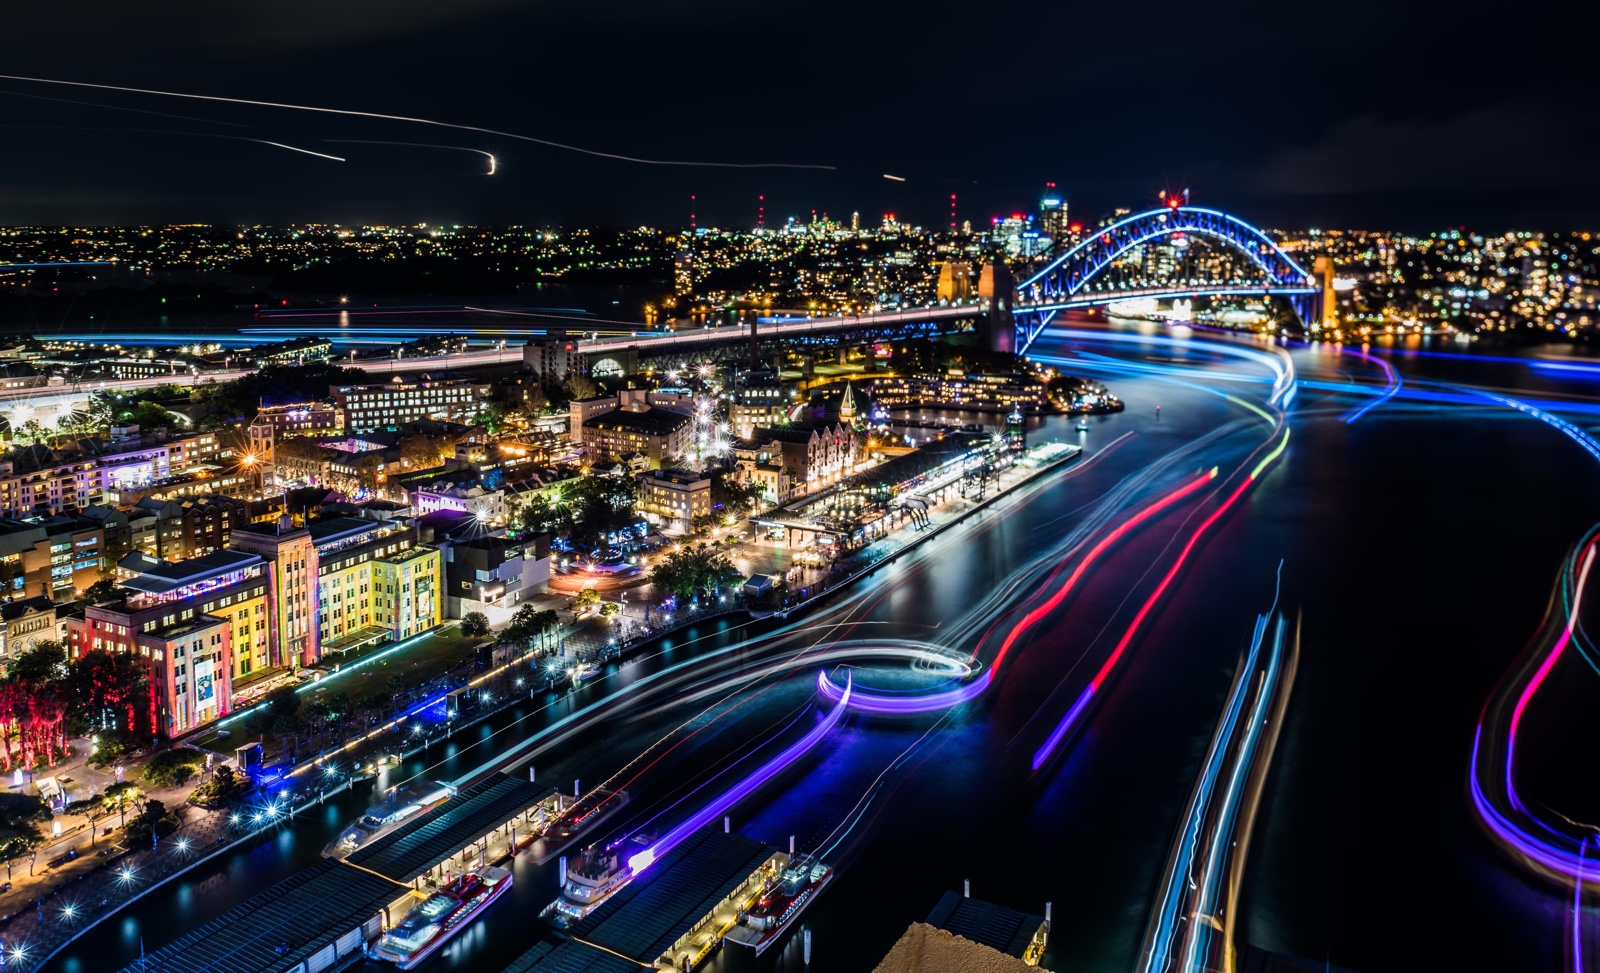 Sydney Harbour lights up from 6pm each evening during Vivid